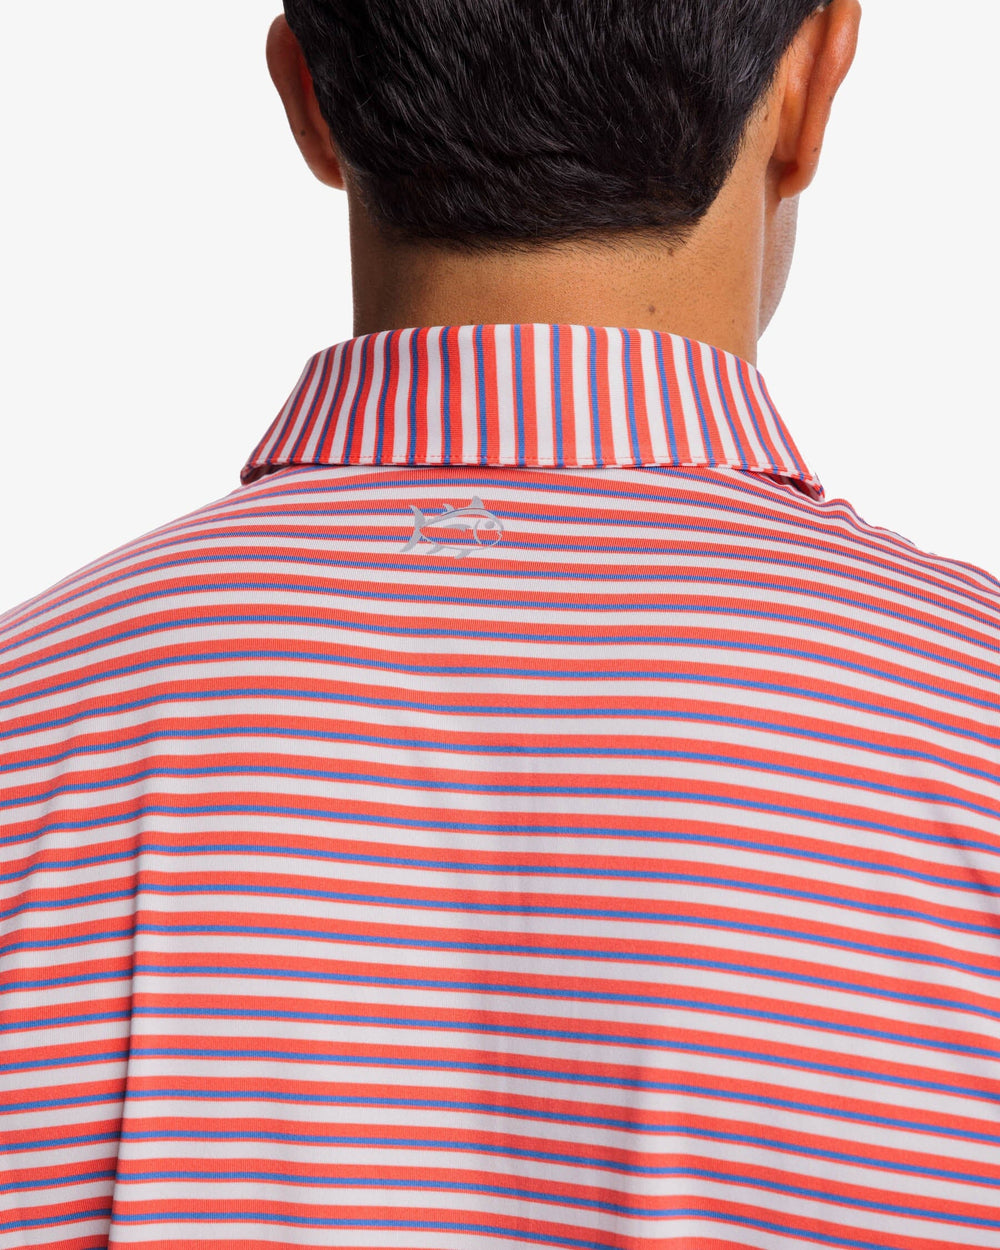 The yoke view of the Southern Tide Driver Gulf Stripe Polo Shirt by Southern Tide - Rosewood Red